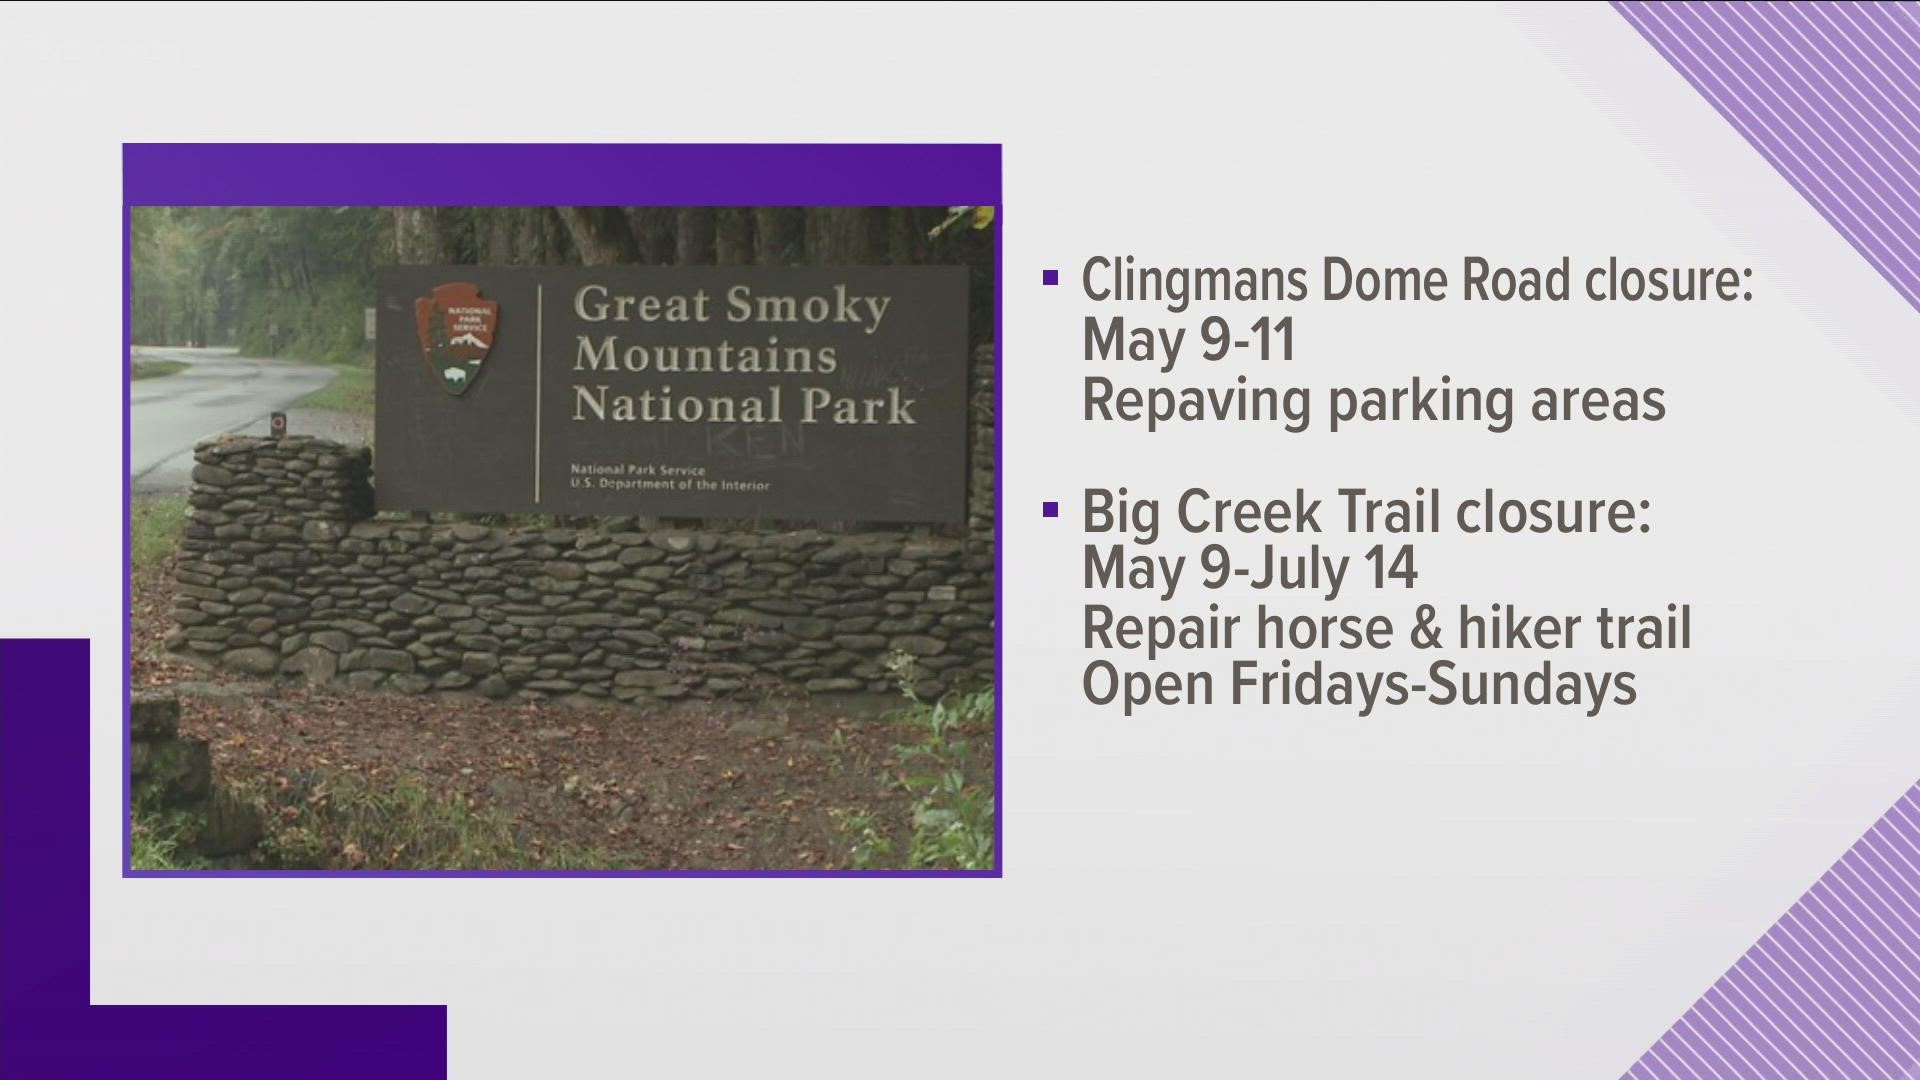 Clingmans Dome Road will be closed next Monday through Wednesday. The park will also shut down Big Creek Trail from next Monday to July 14.